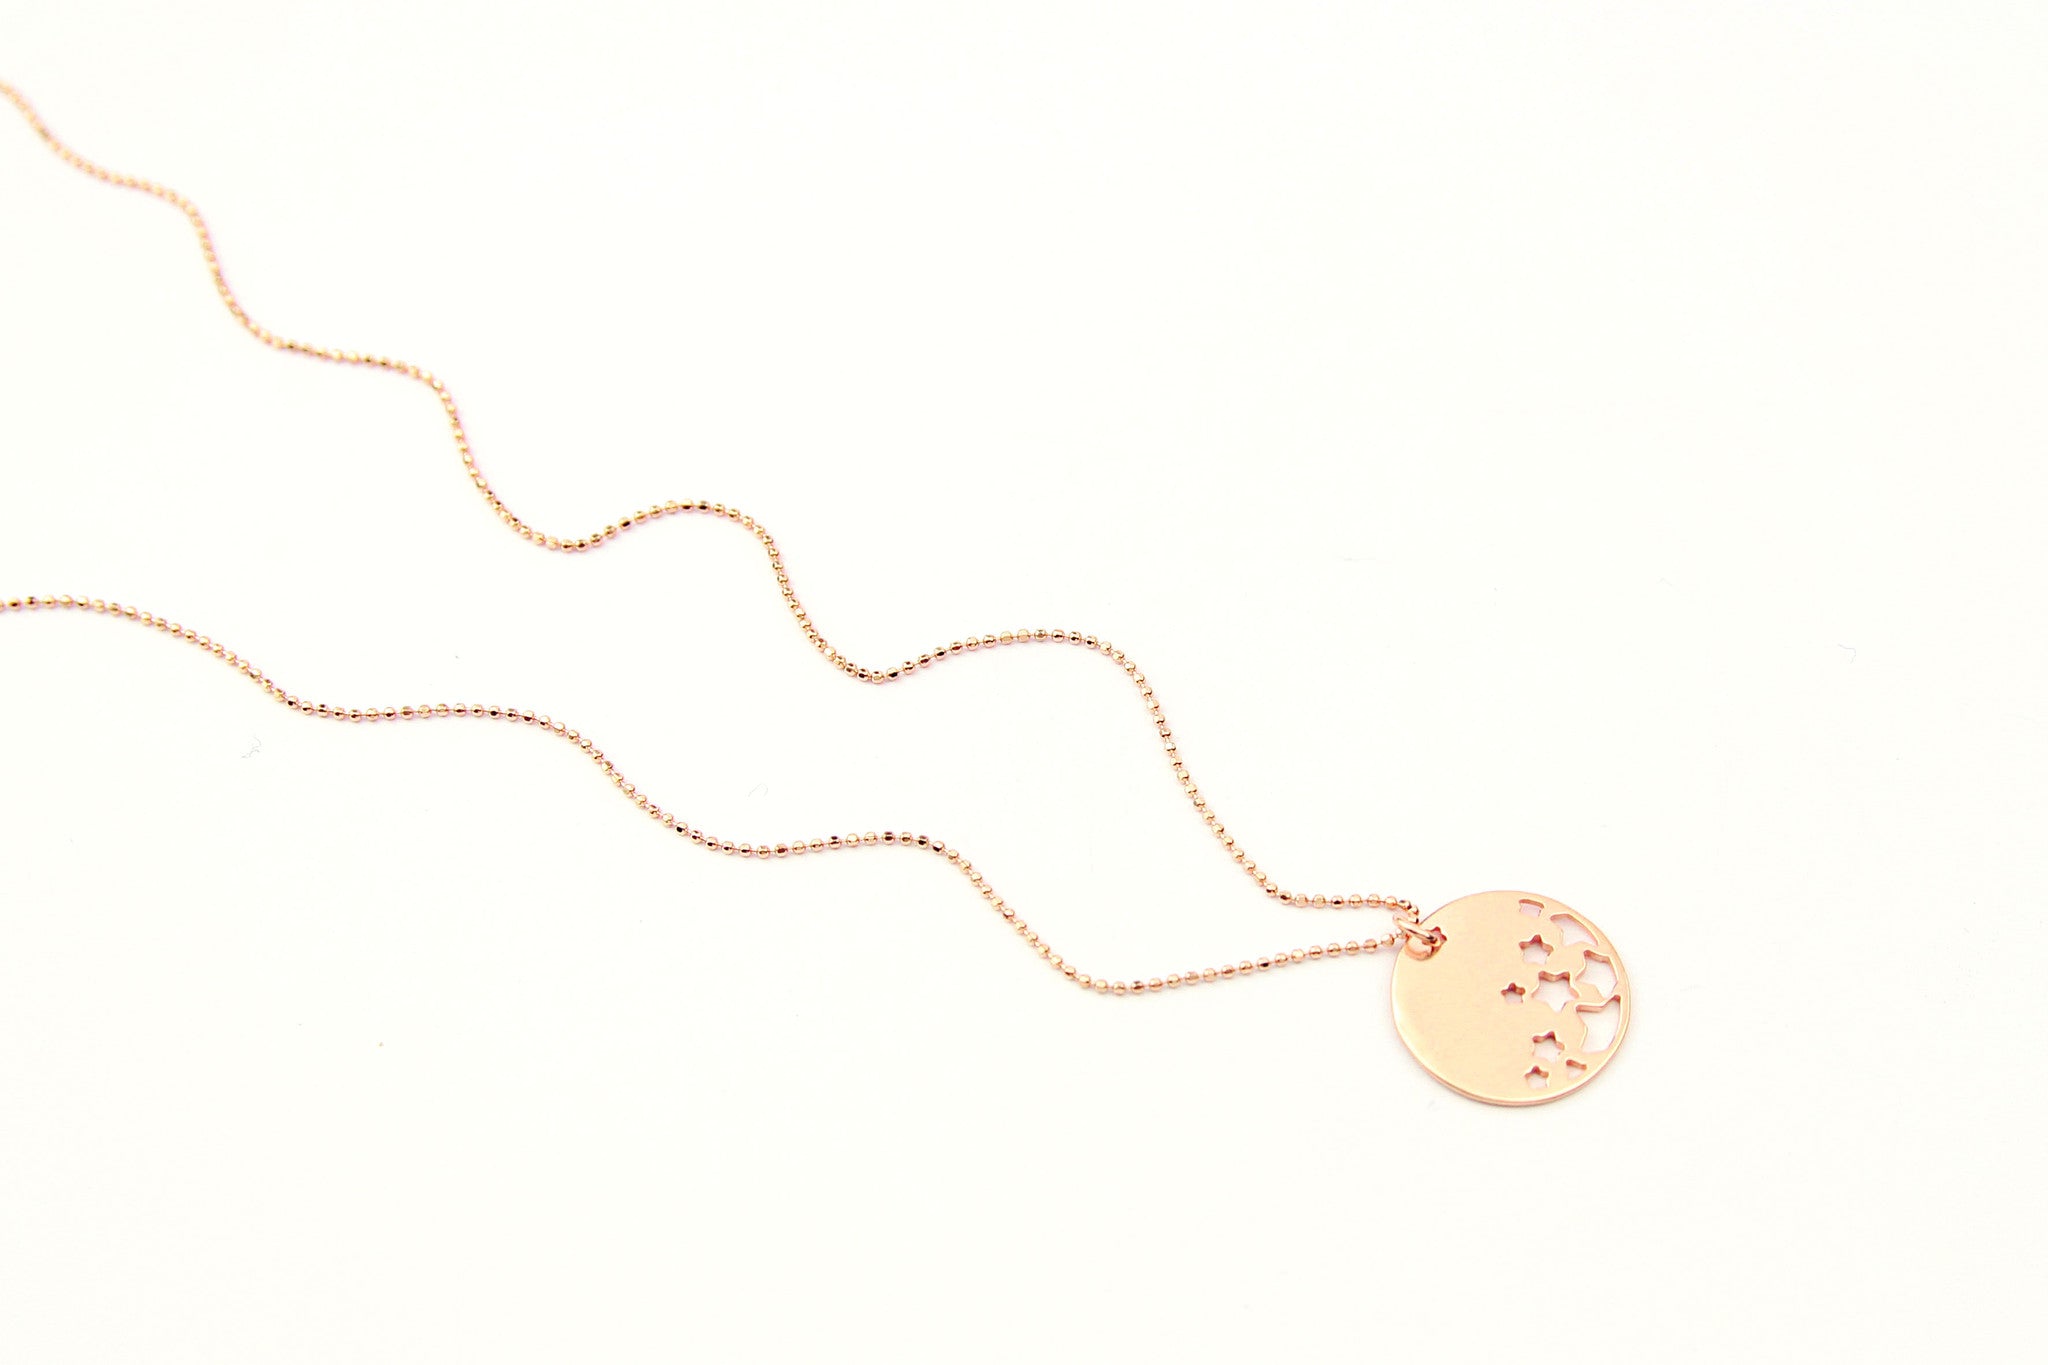 jewelberry necklace kette night sky faceted bead chain rose gold plated sterling silver fine jewelry handmade with love fairtrade